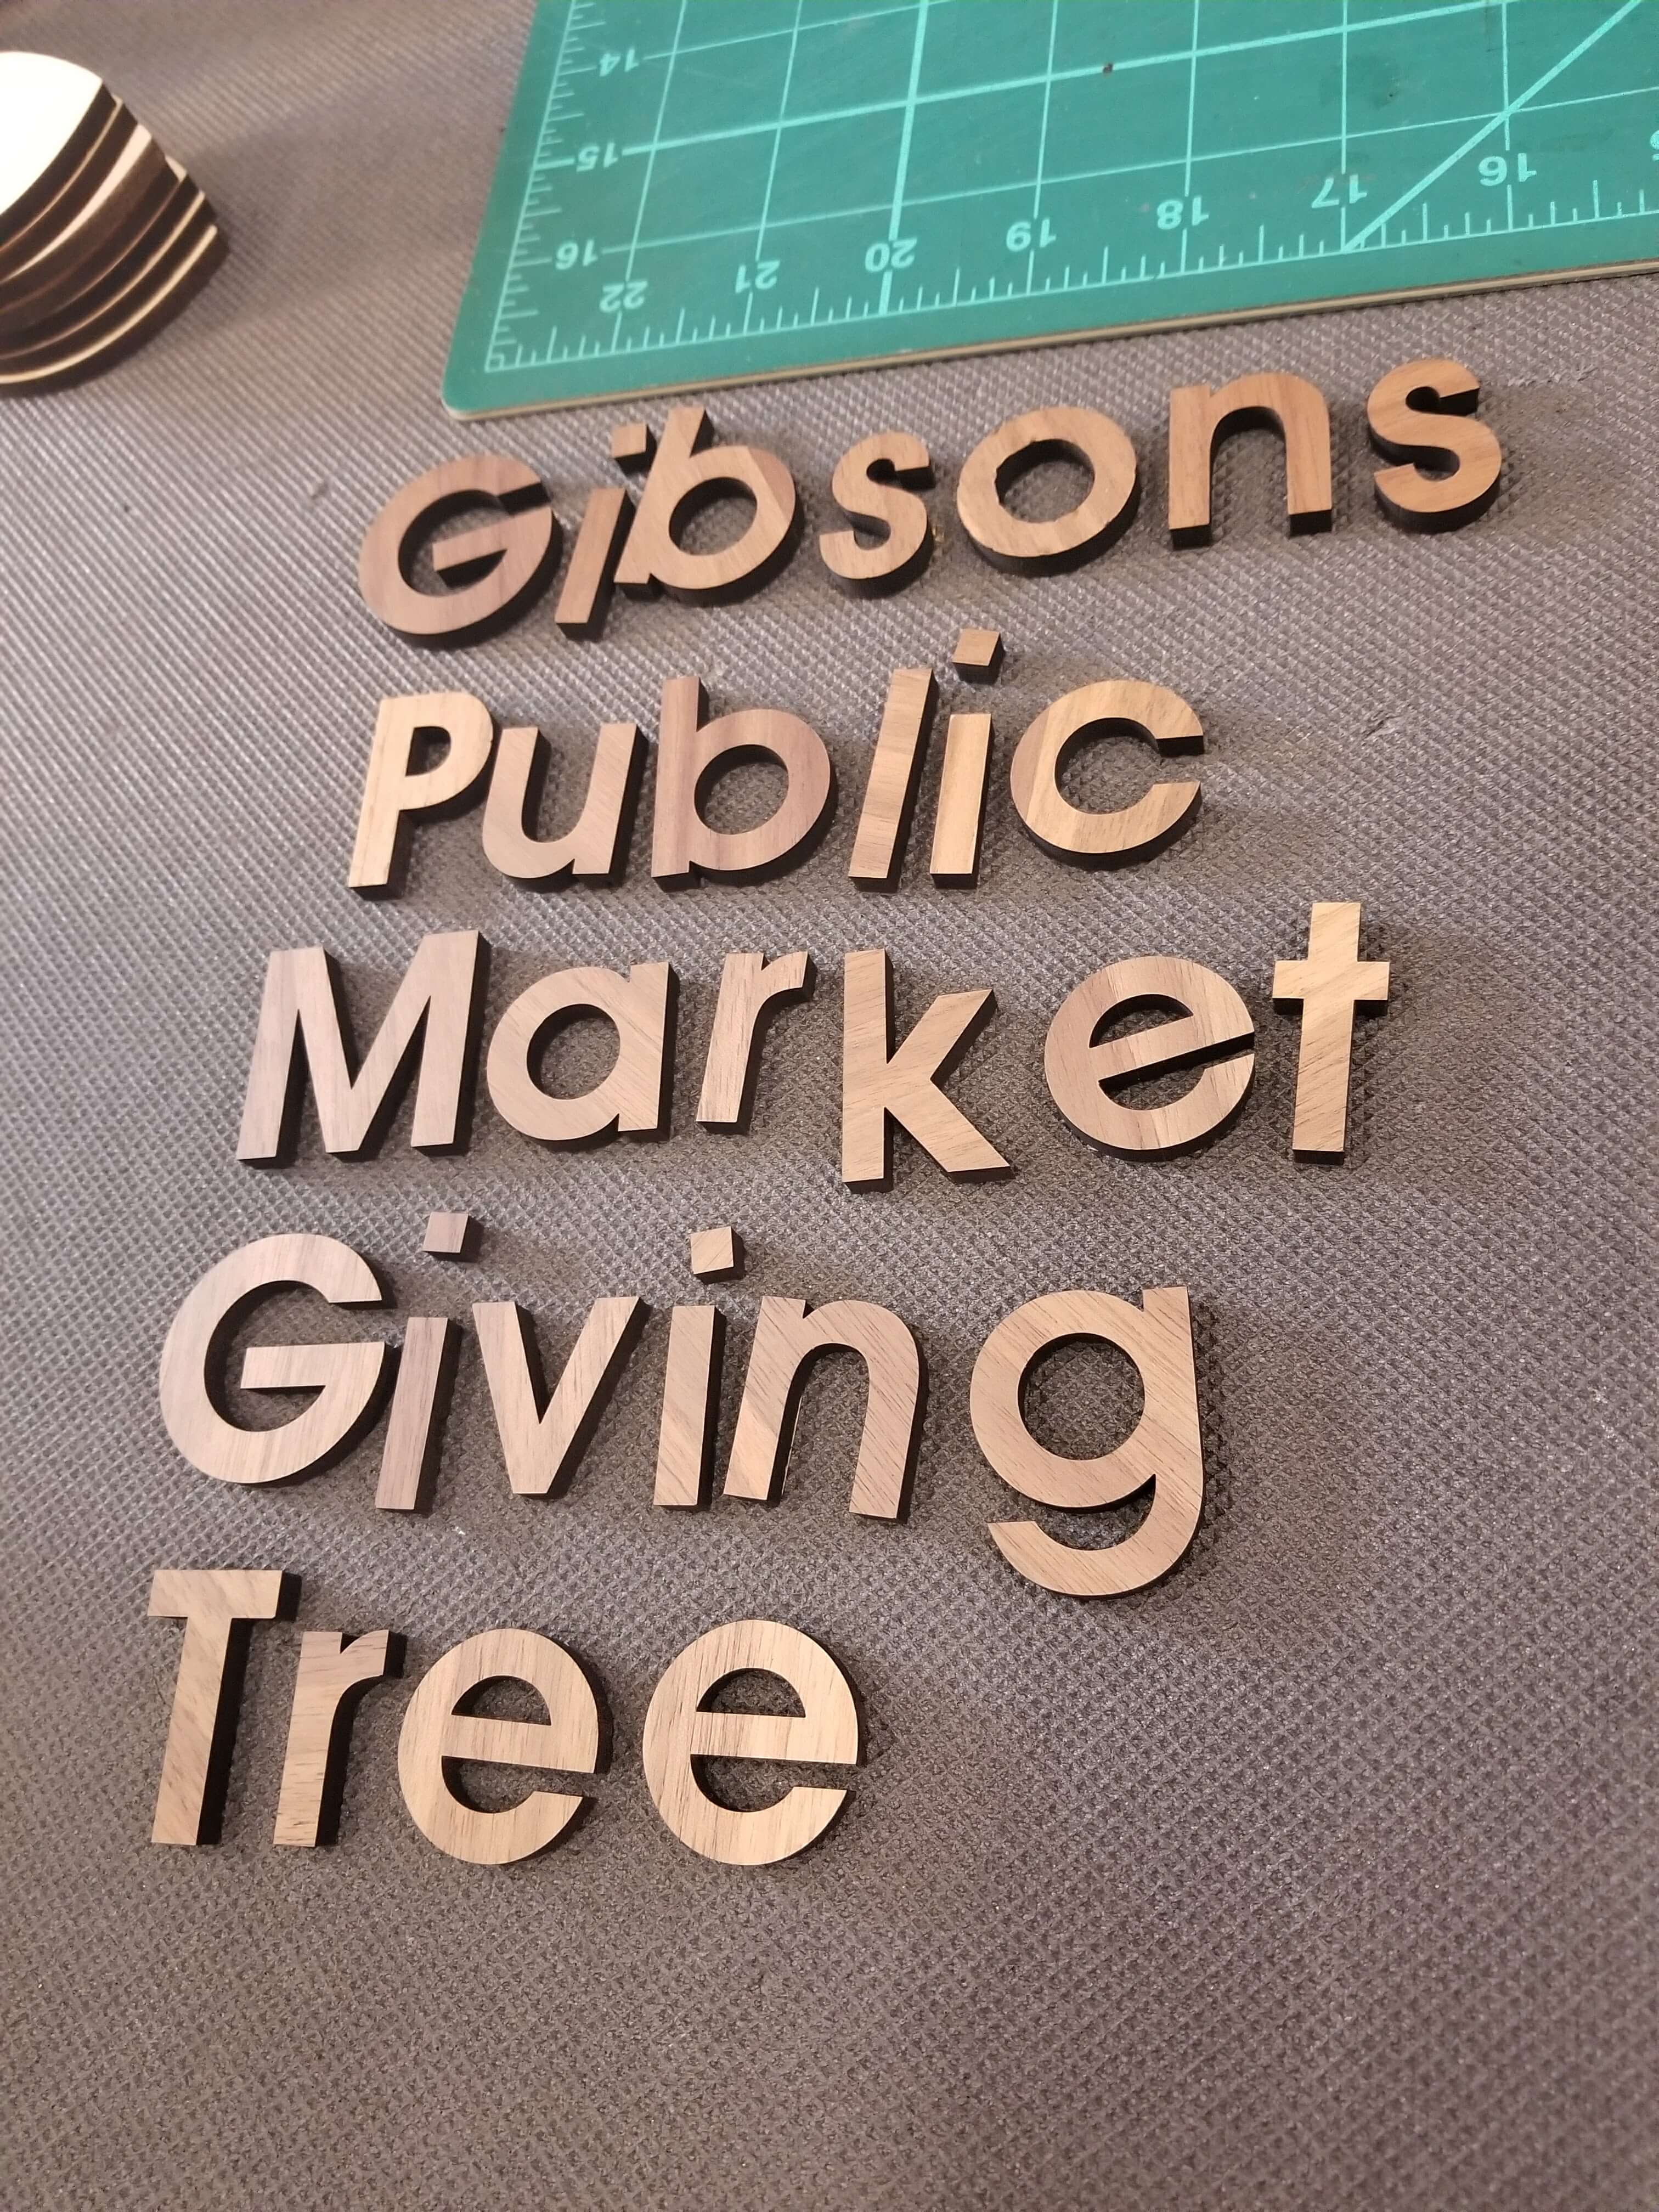 giving-tree-donor-recognition-walls-19